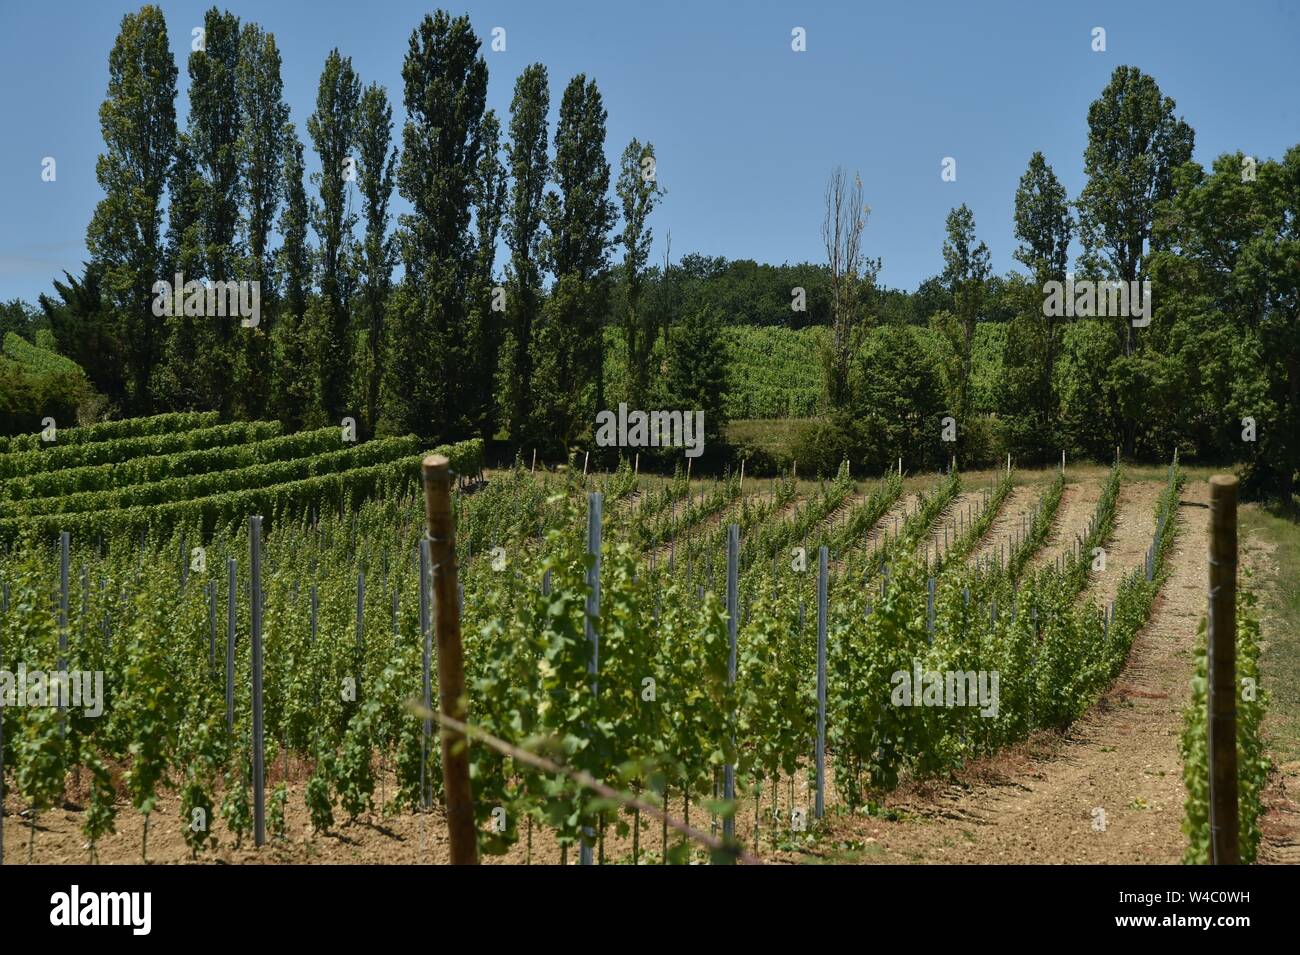 Vineyards, south of France, Bergerac Stock Photo